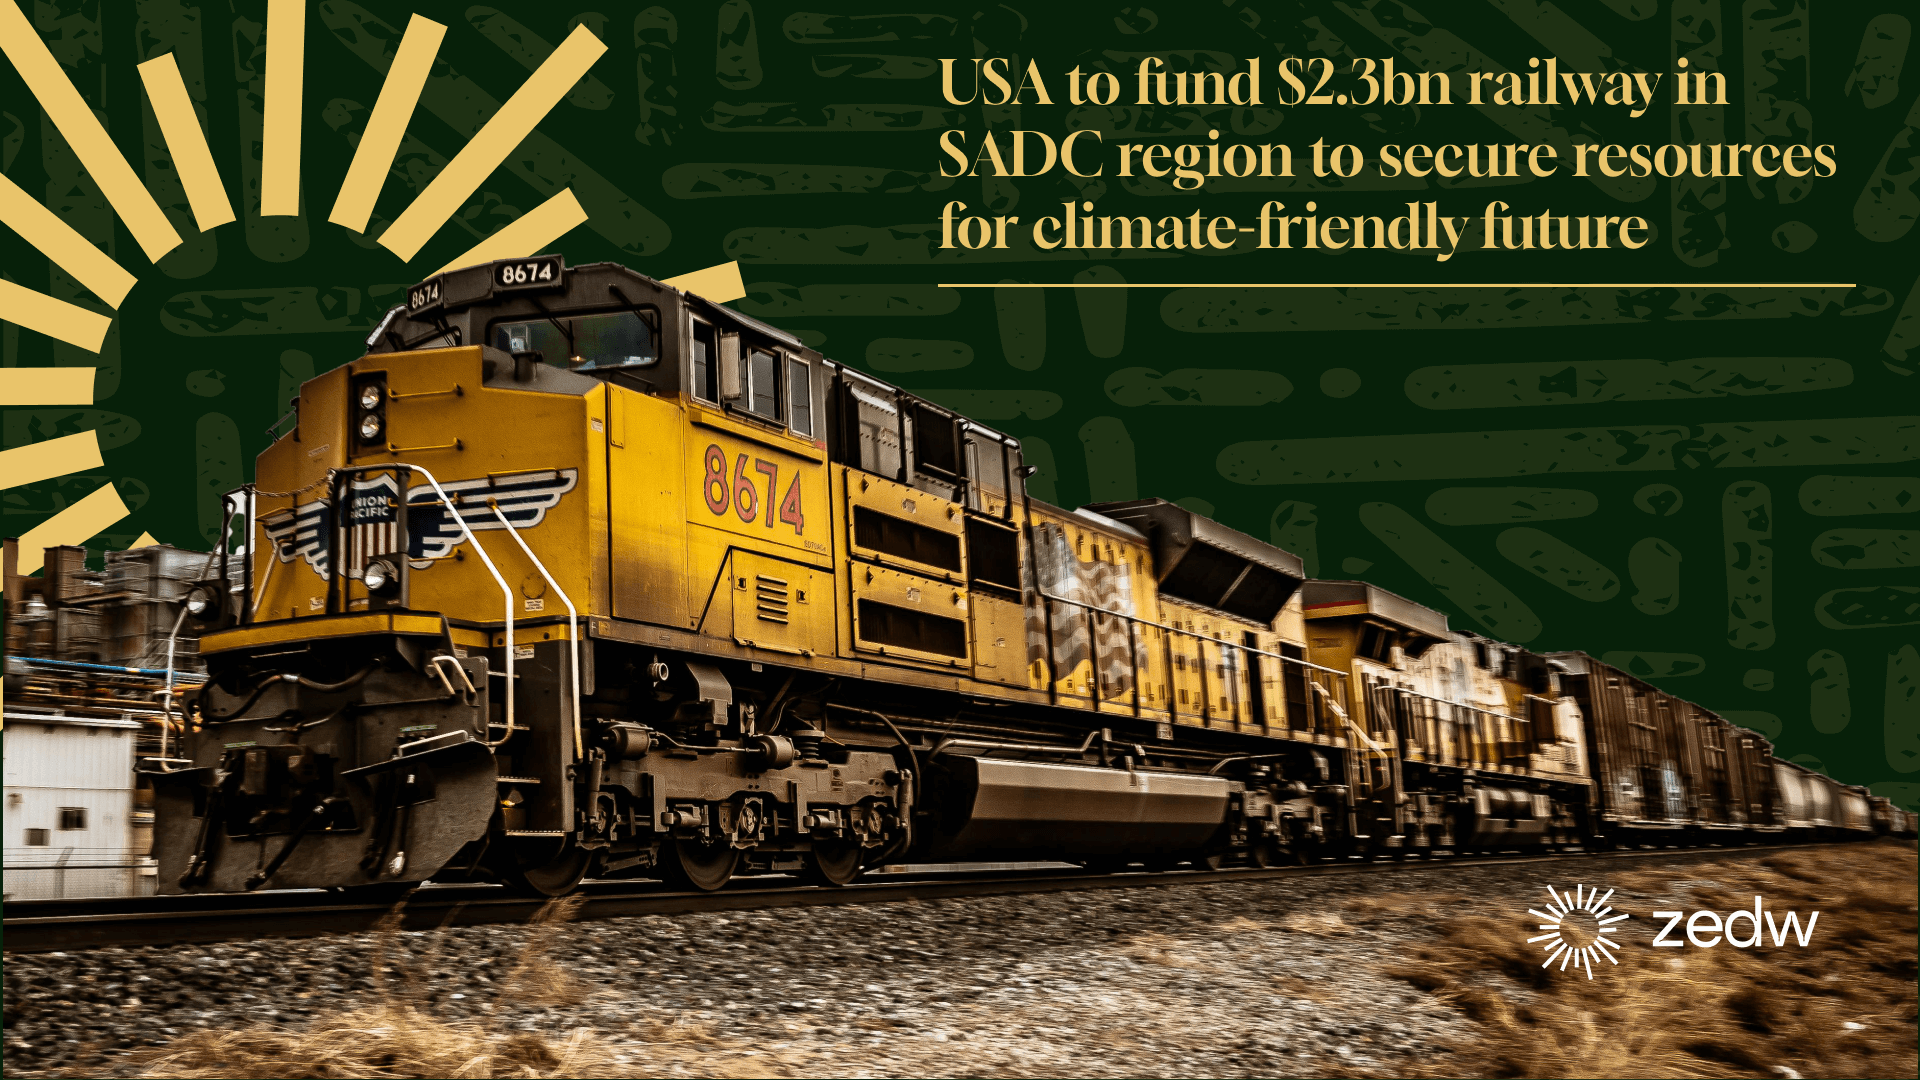 USA to fund $2.3bn railway in SADC region to secure resources for climate-friendly future